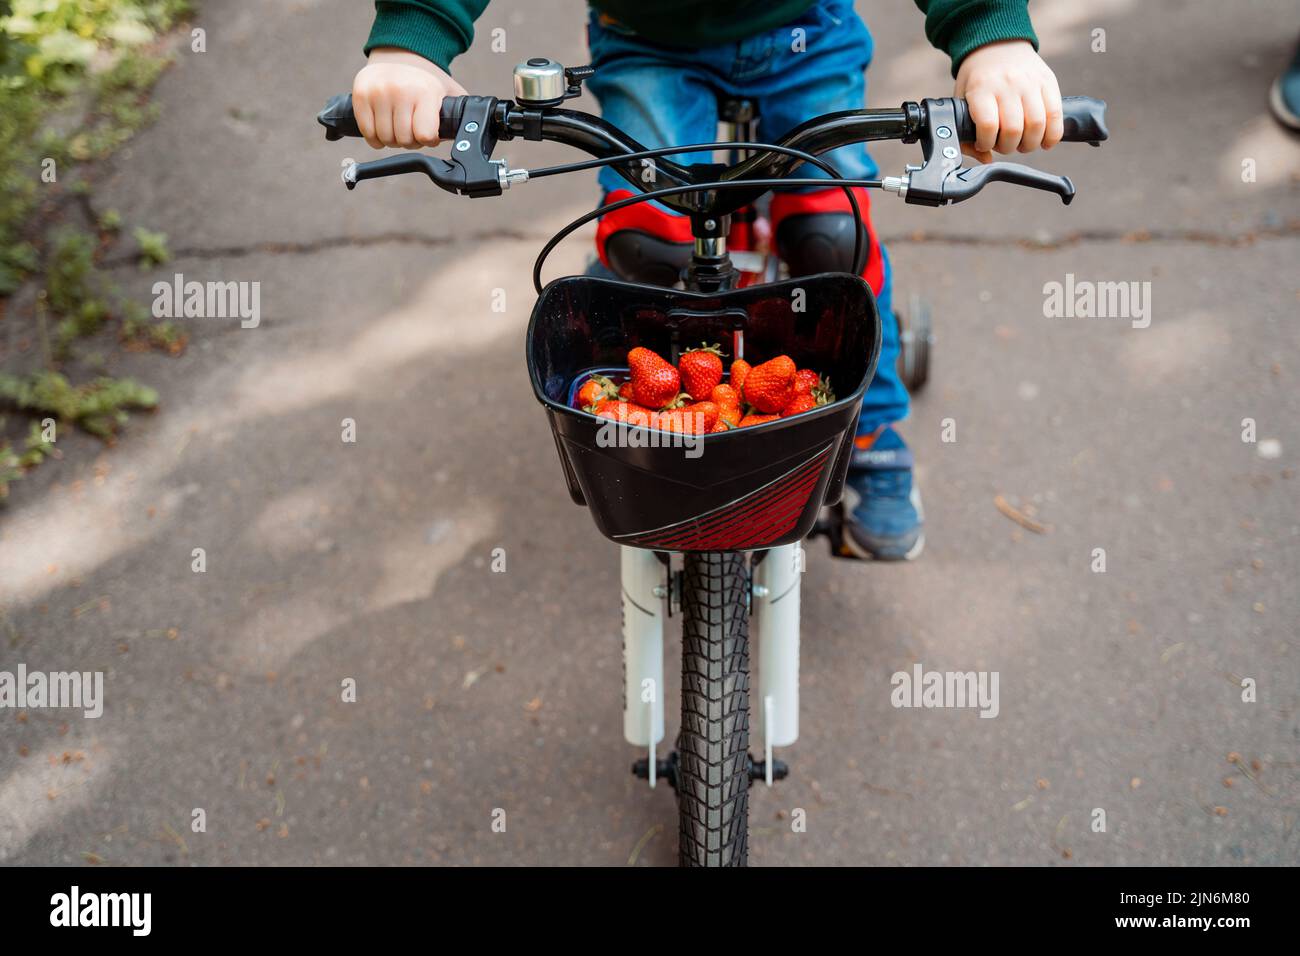 a boy on a bicycle carries strawberries in a basket Stock Photo